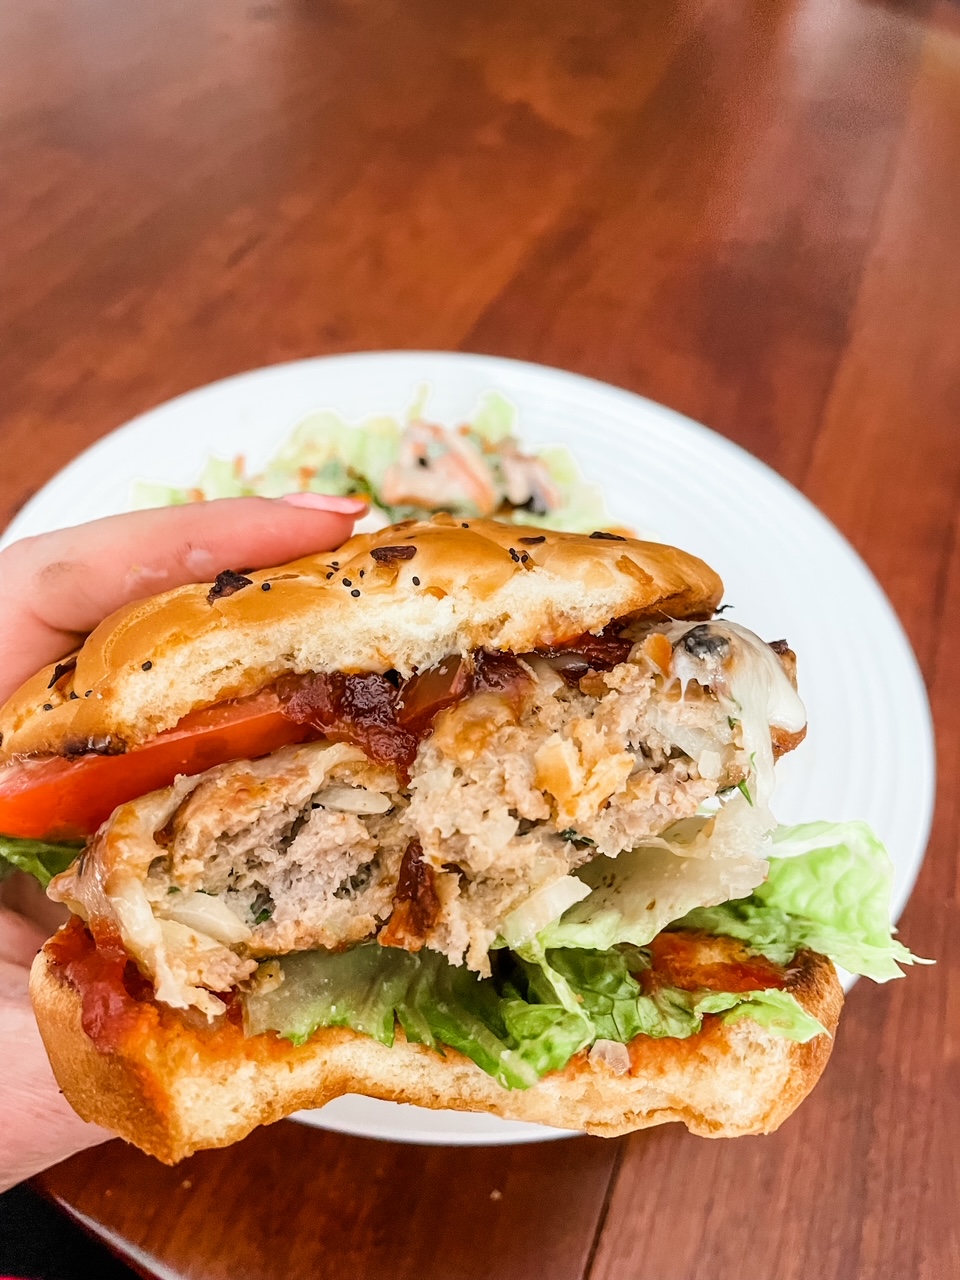 One of the Best Grilled Turkey Burgers with a bite taken from it